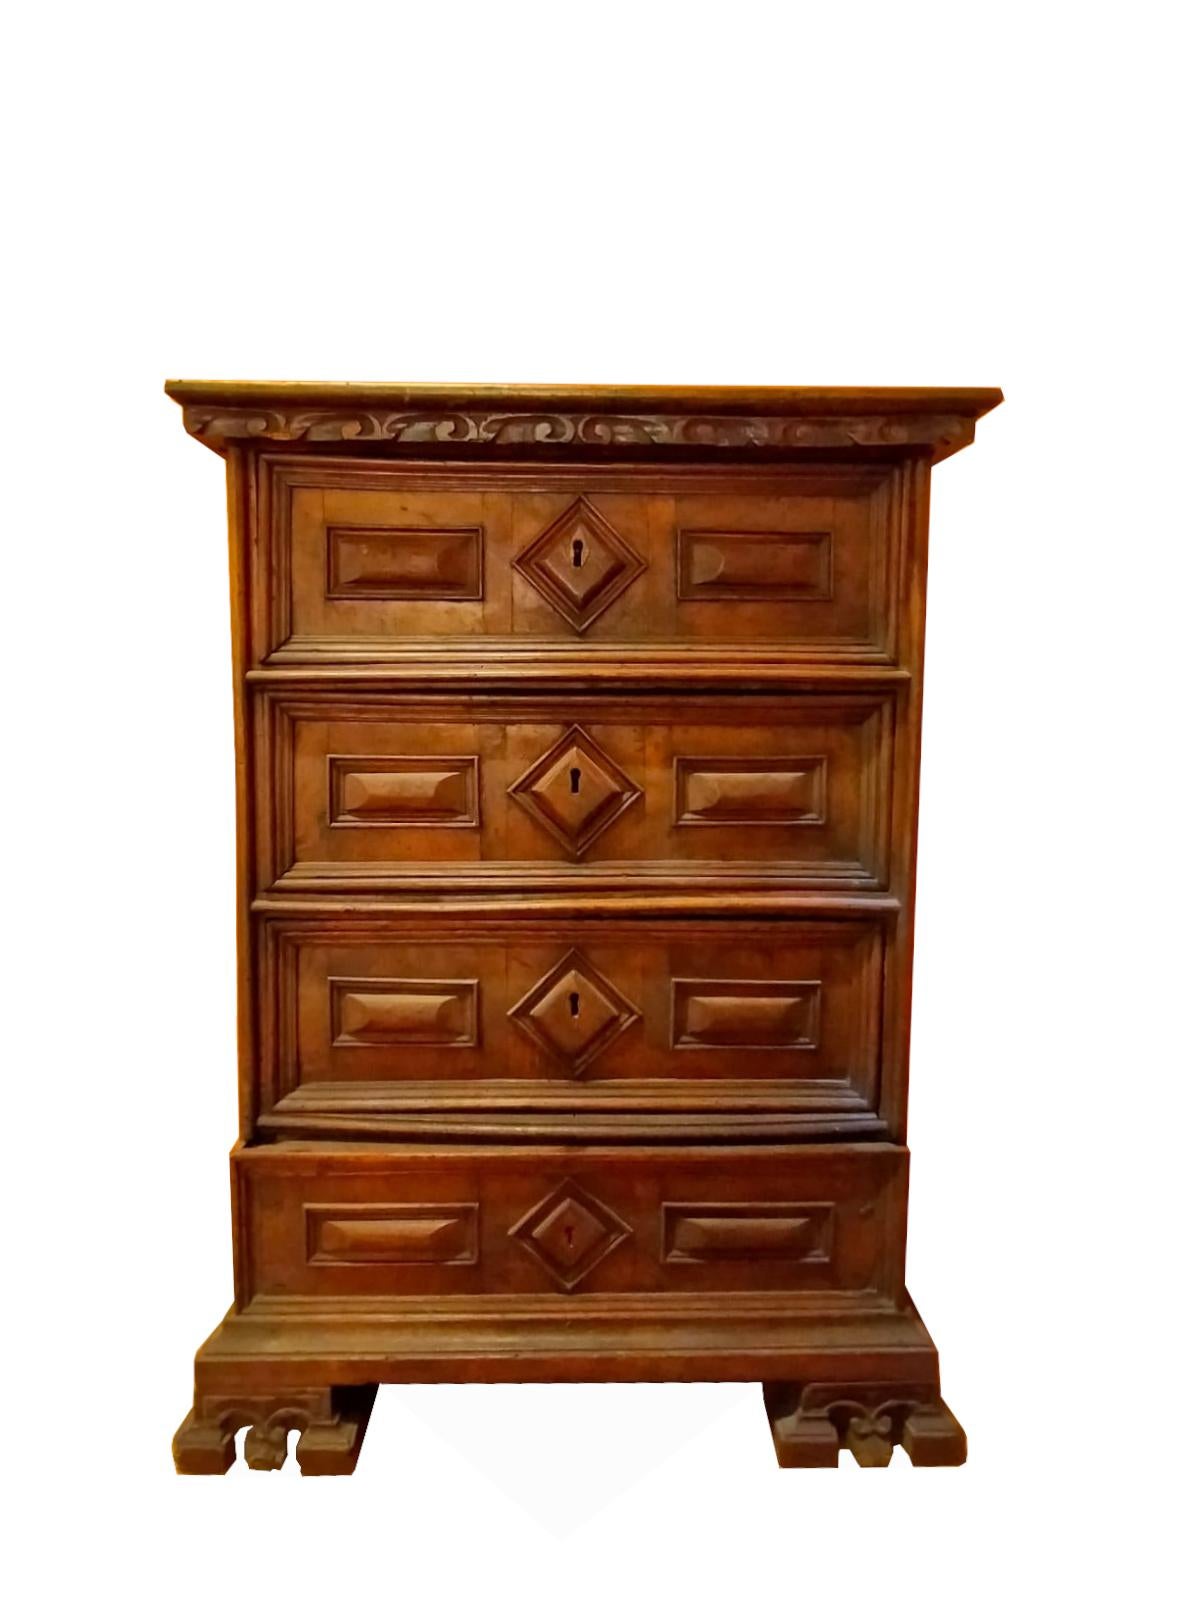 Lombard / Venetian kneeler from the 1600s, in patina
Solid walnut with Greek carved details under the top and capital feet
Drawers panelled in briarwood, with squared panels with frames typical of the area of origin, 
Measures top 70 x 27 H. cm